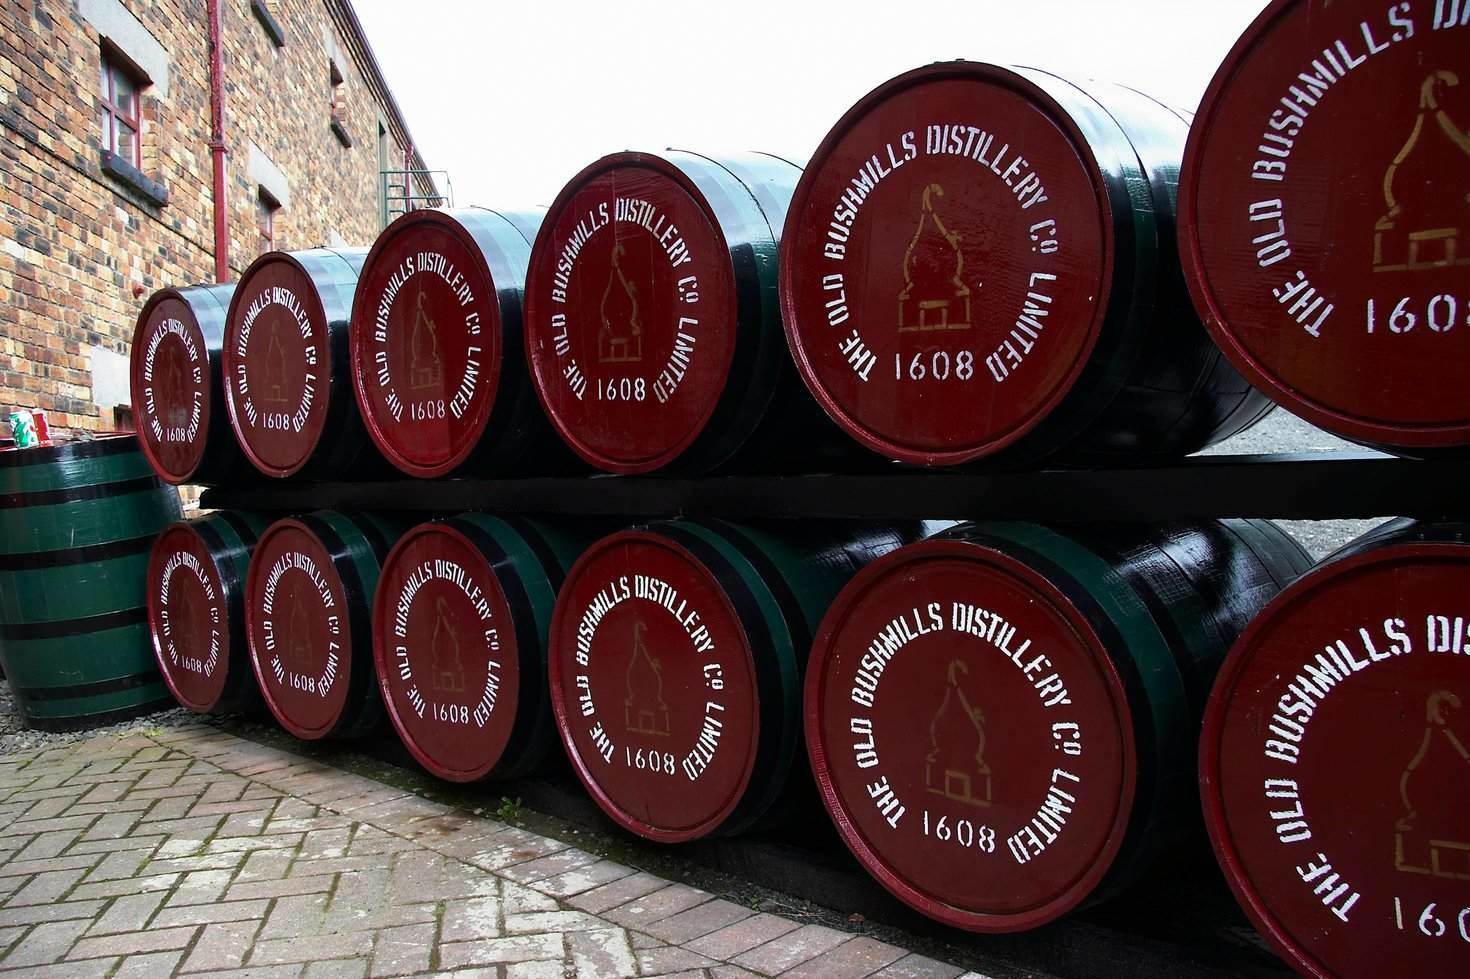 “Irish whiskey will be the EU's largest whiskey category once Scotland leaves”.